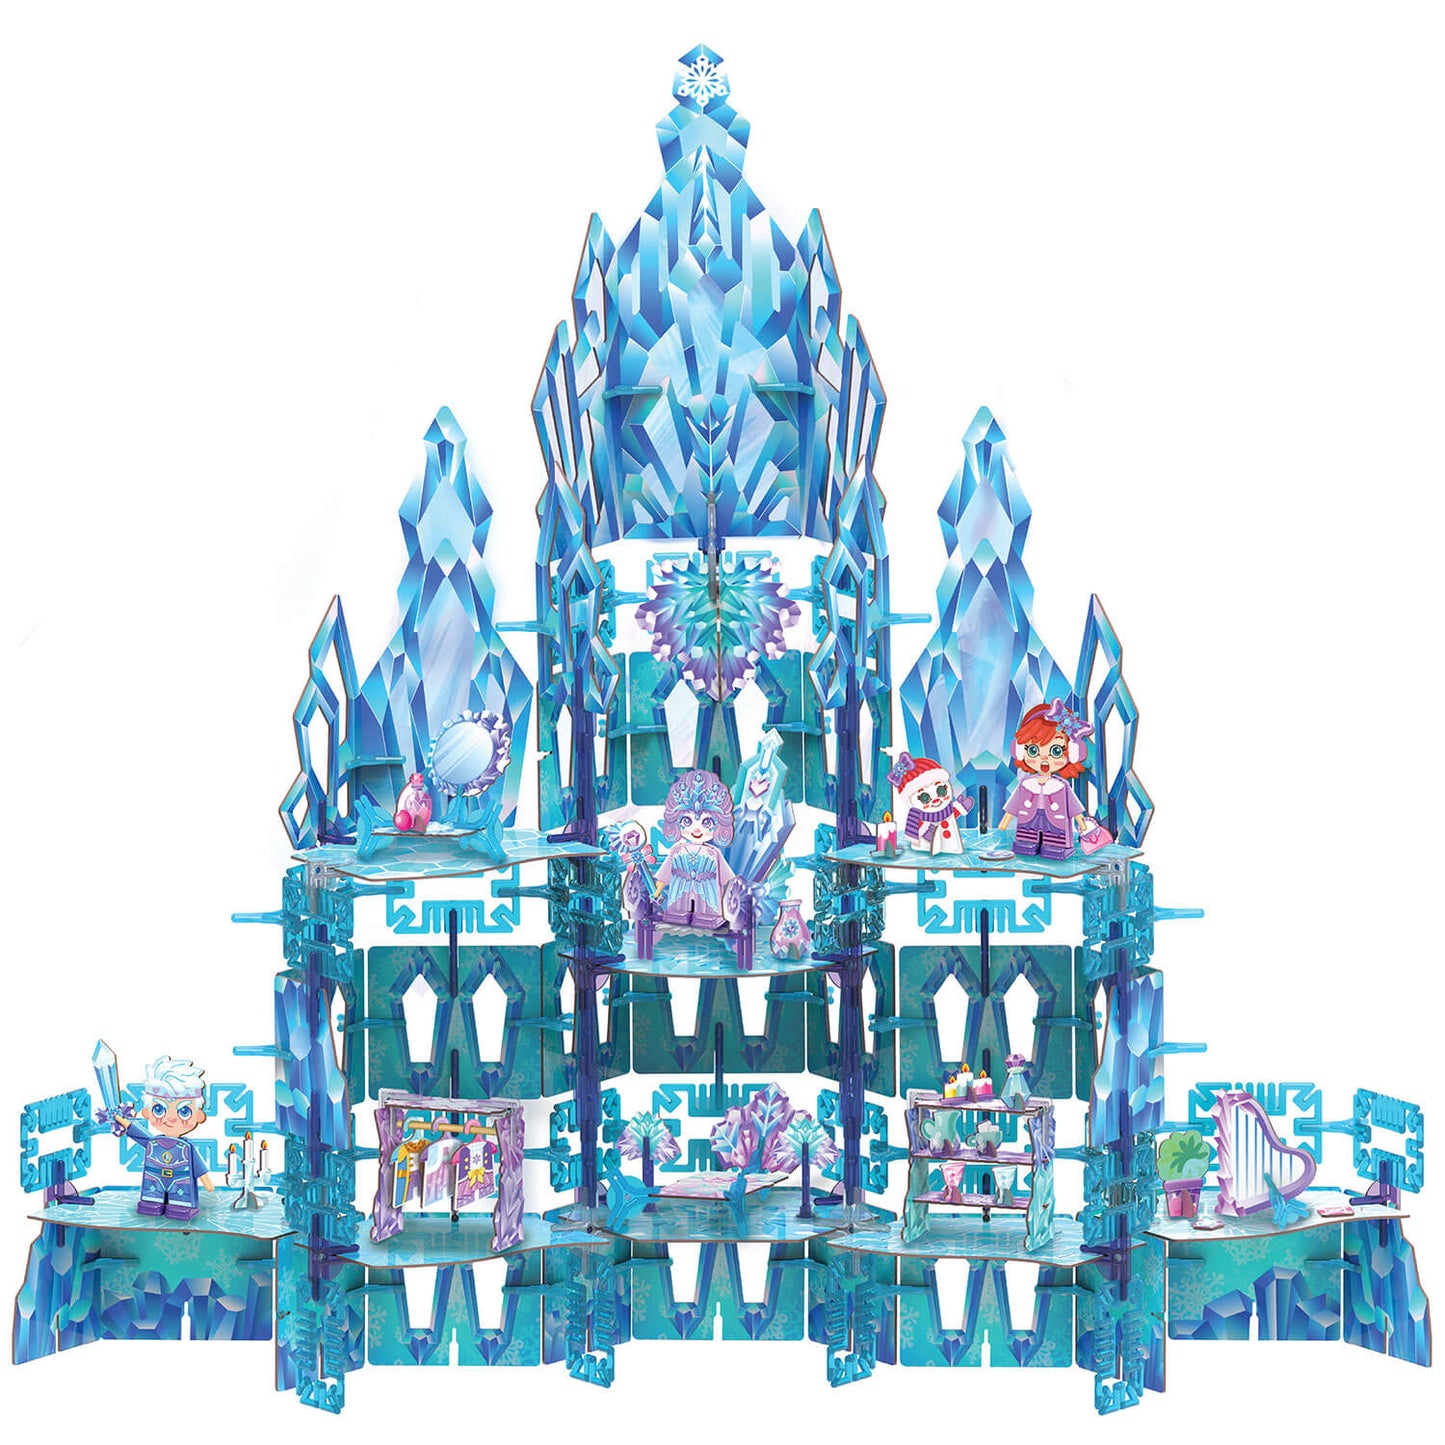 Pinxies Enchanted Ice Castle is a STEM authenticated building set for ages 6+